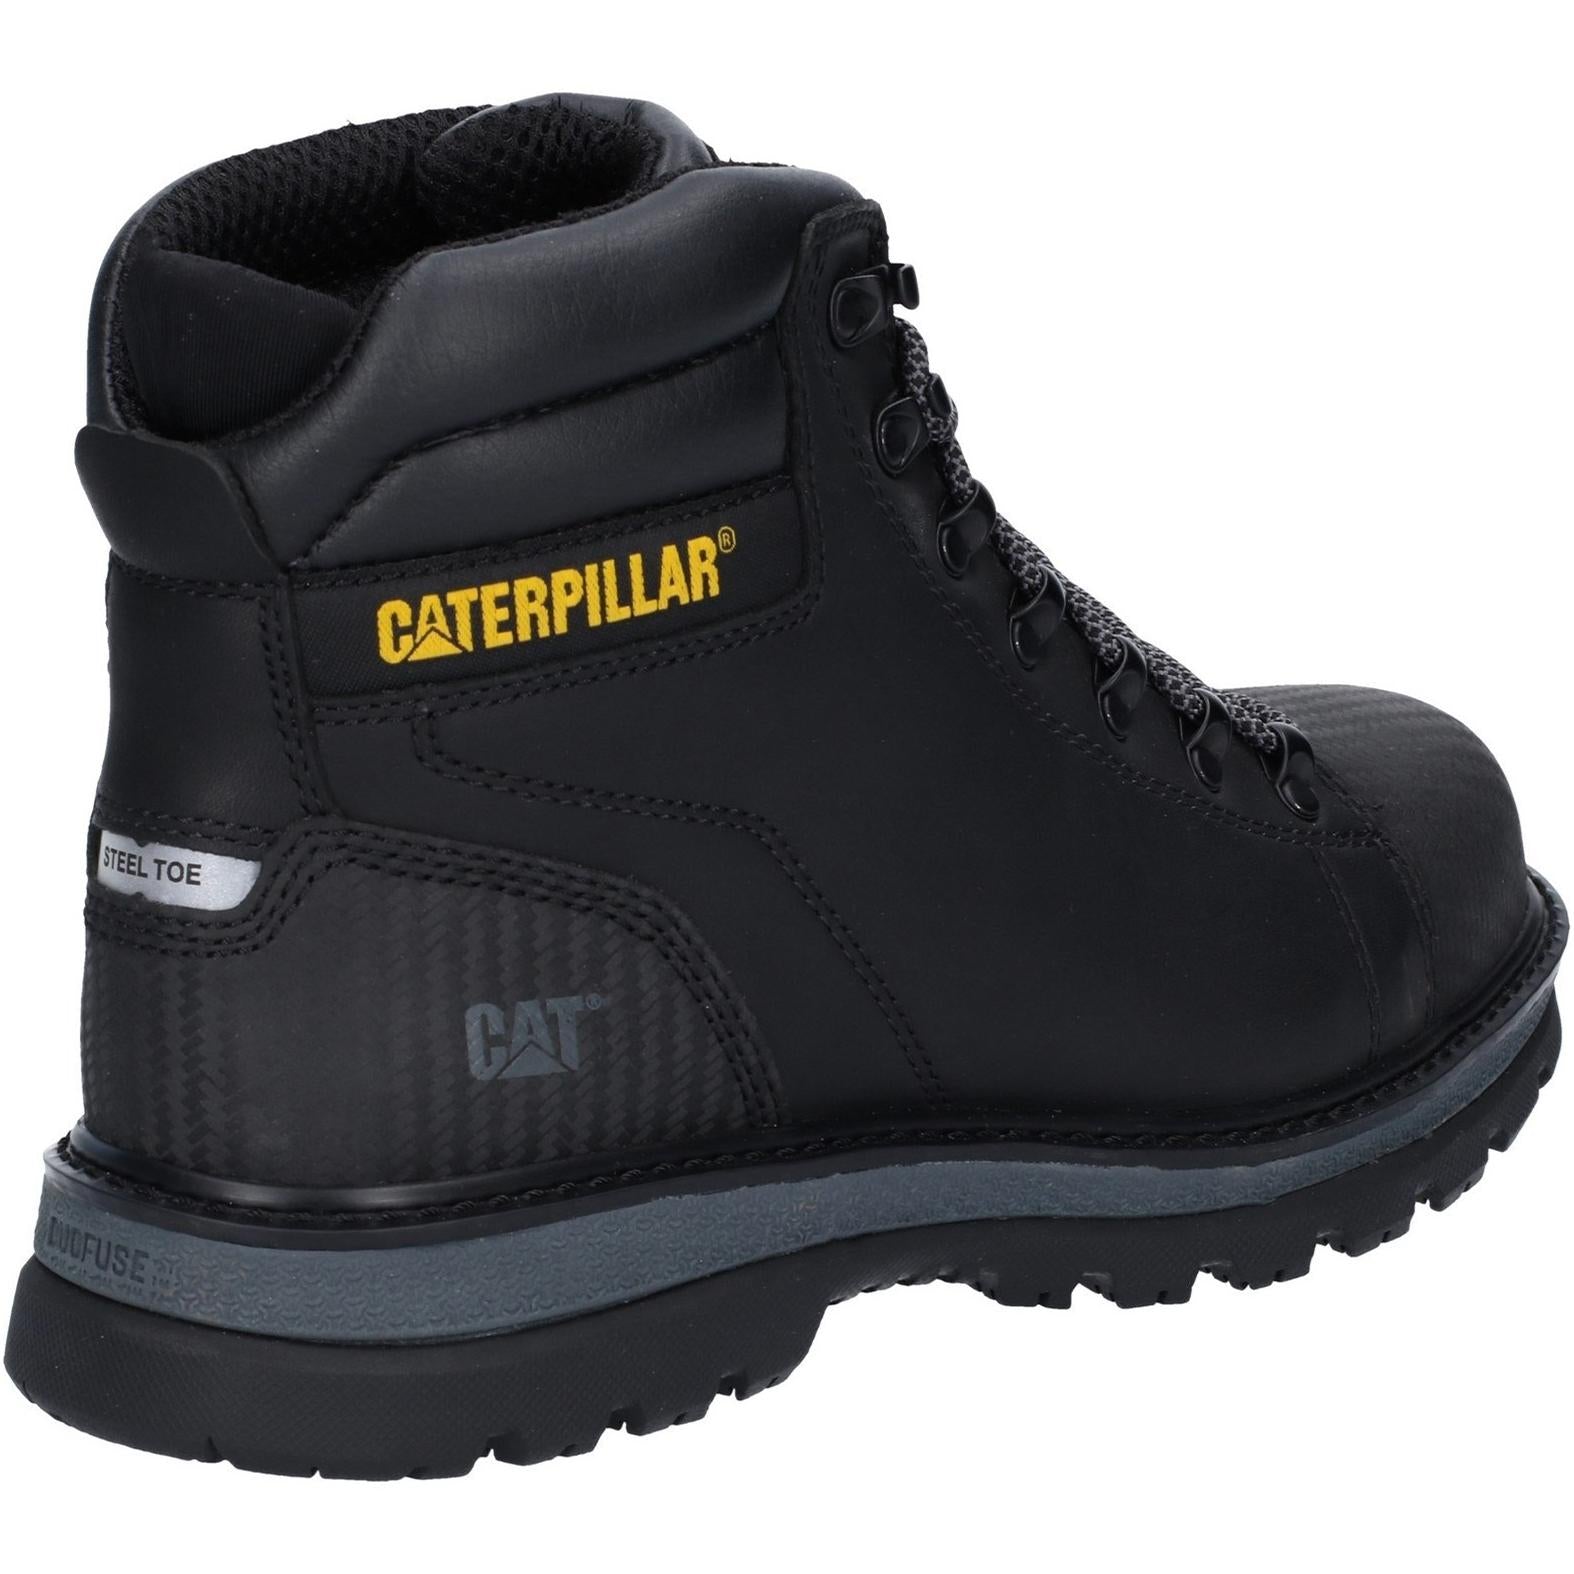 Caterpillar Foxfield Lace Up Safety Boot